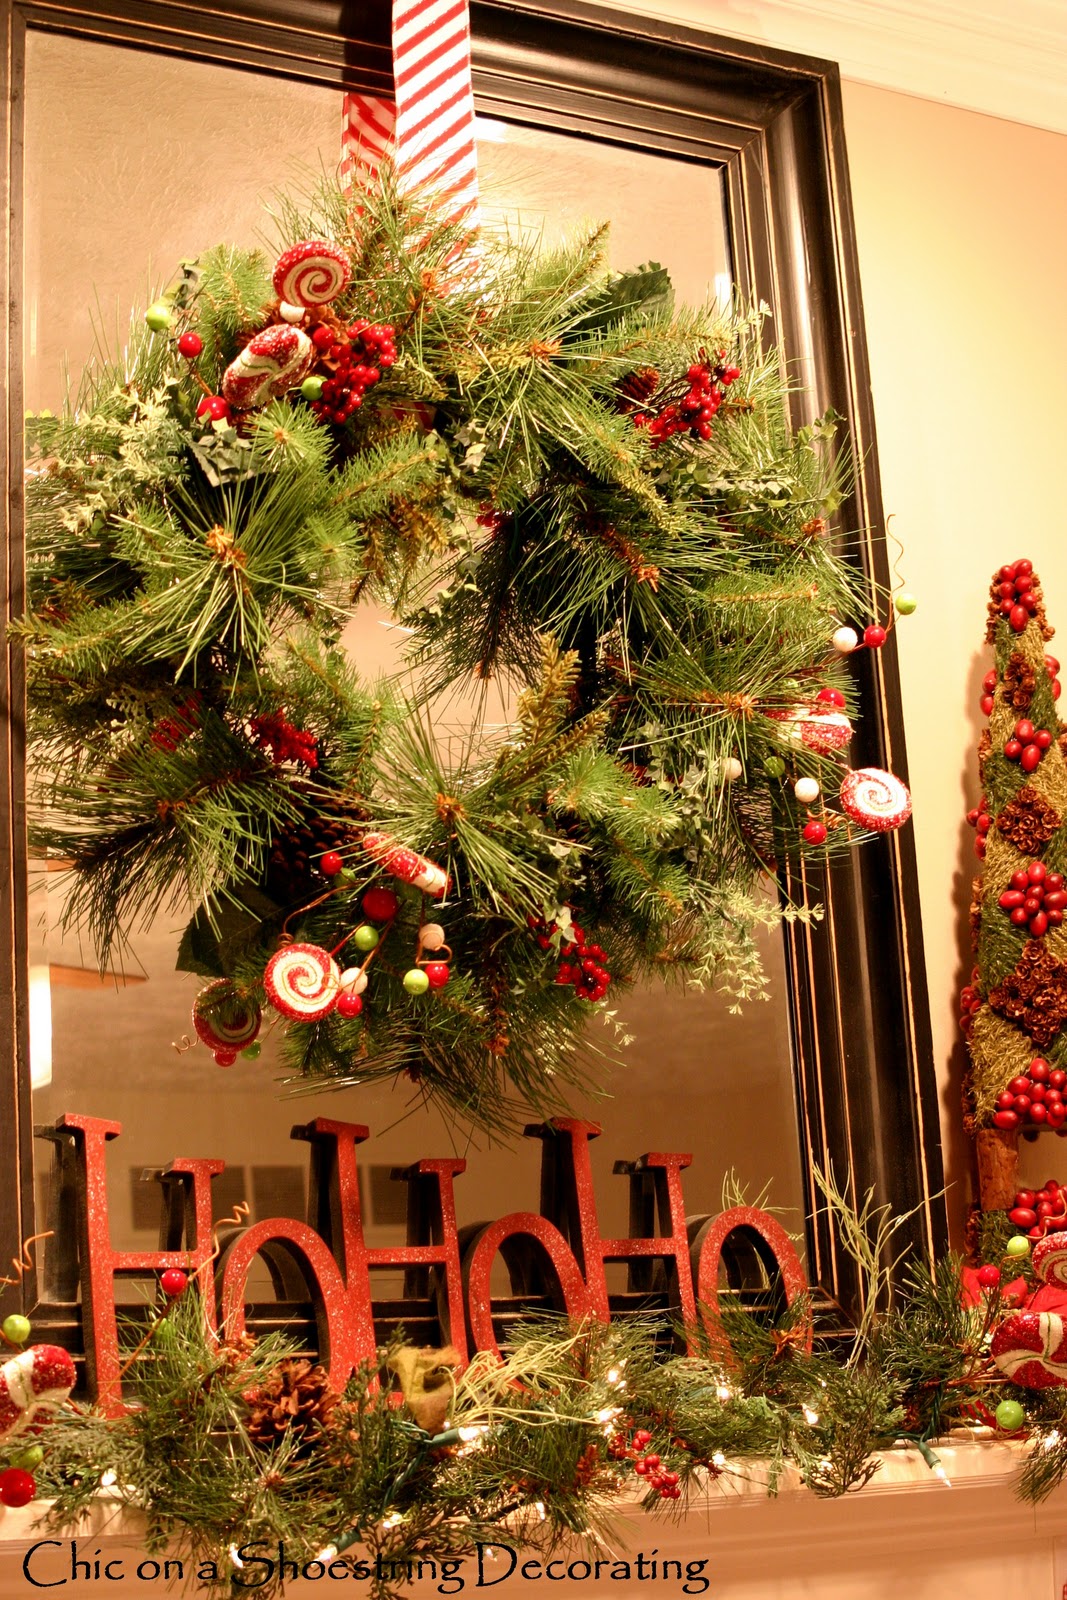 Chic on a Shoestring Decorating: Sprucin' up my Christmas mantel on the